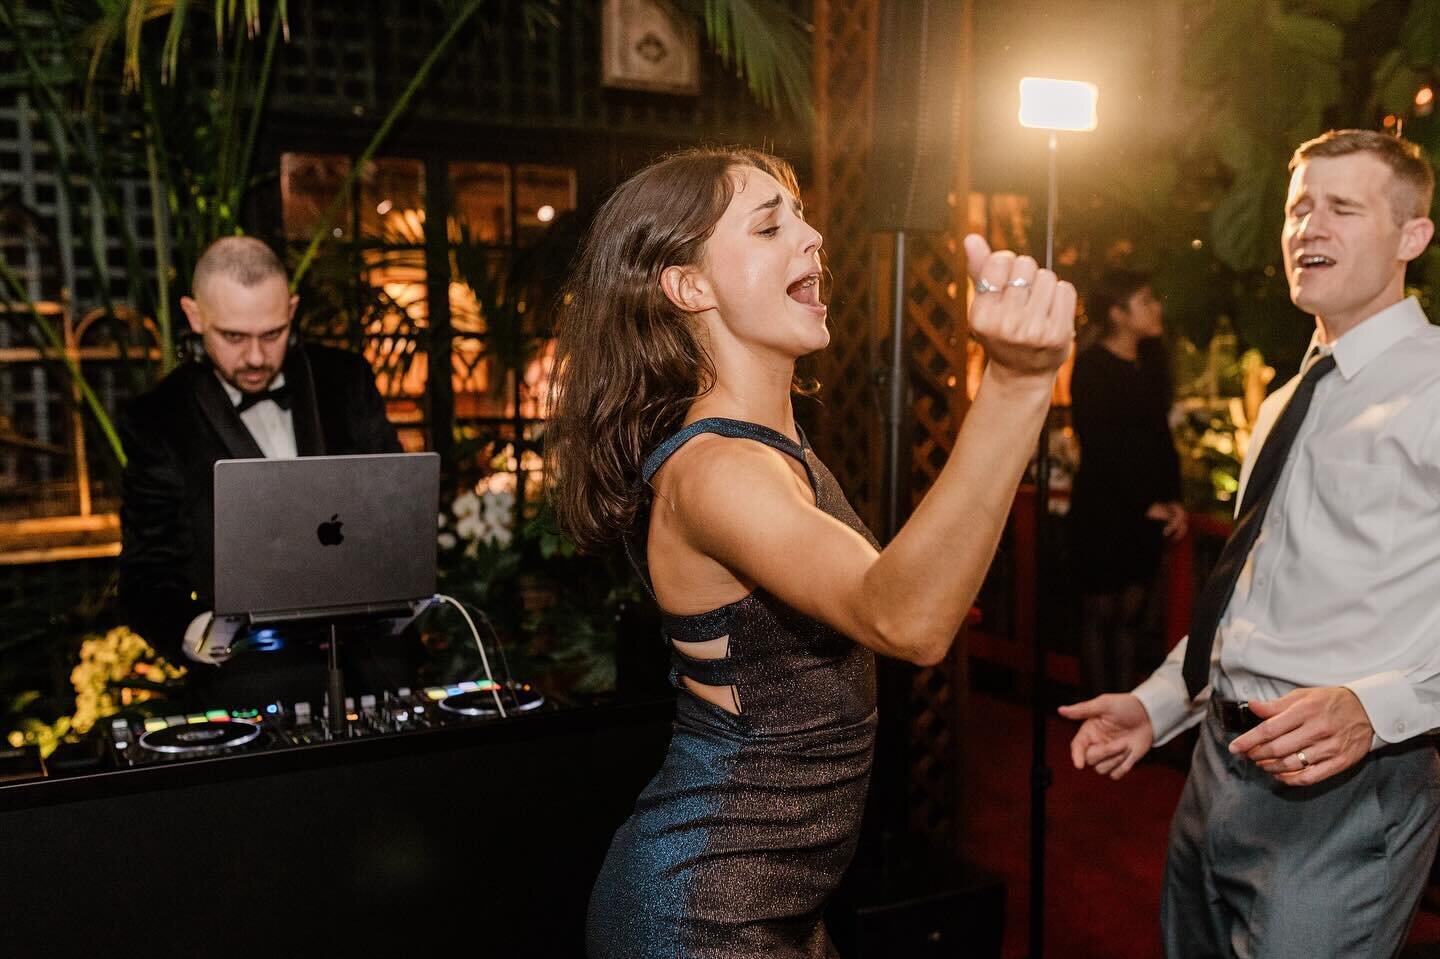 We&rsquo;re serious about sing alongs, dancing and just some good old fun 💃🕺🎉🍾🎷thank you to @lizzieburgerphoto for these wonderful photos. Special thank you to Danielle and Brady for bringing us together (@dshpan) 

Venue: @therivercafe 
Plannin